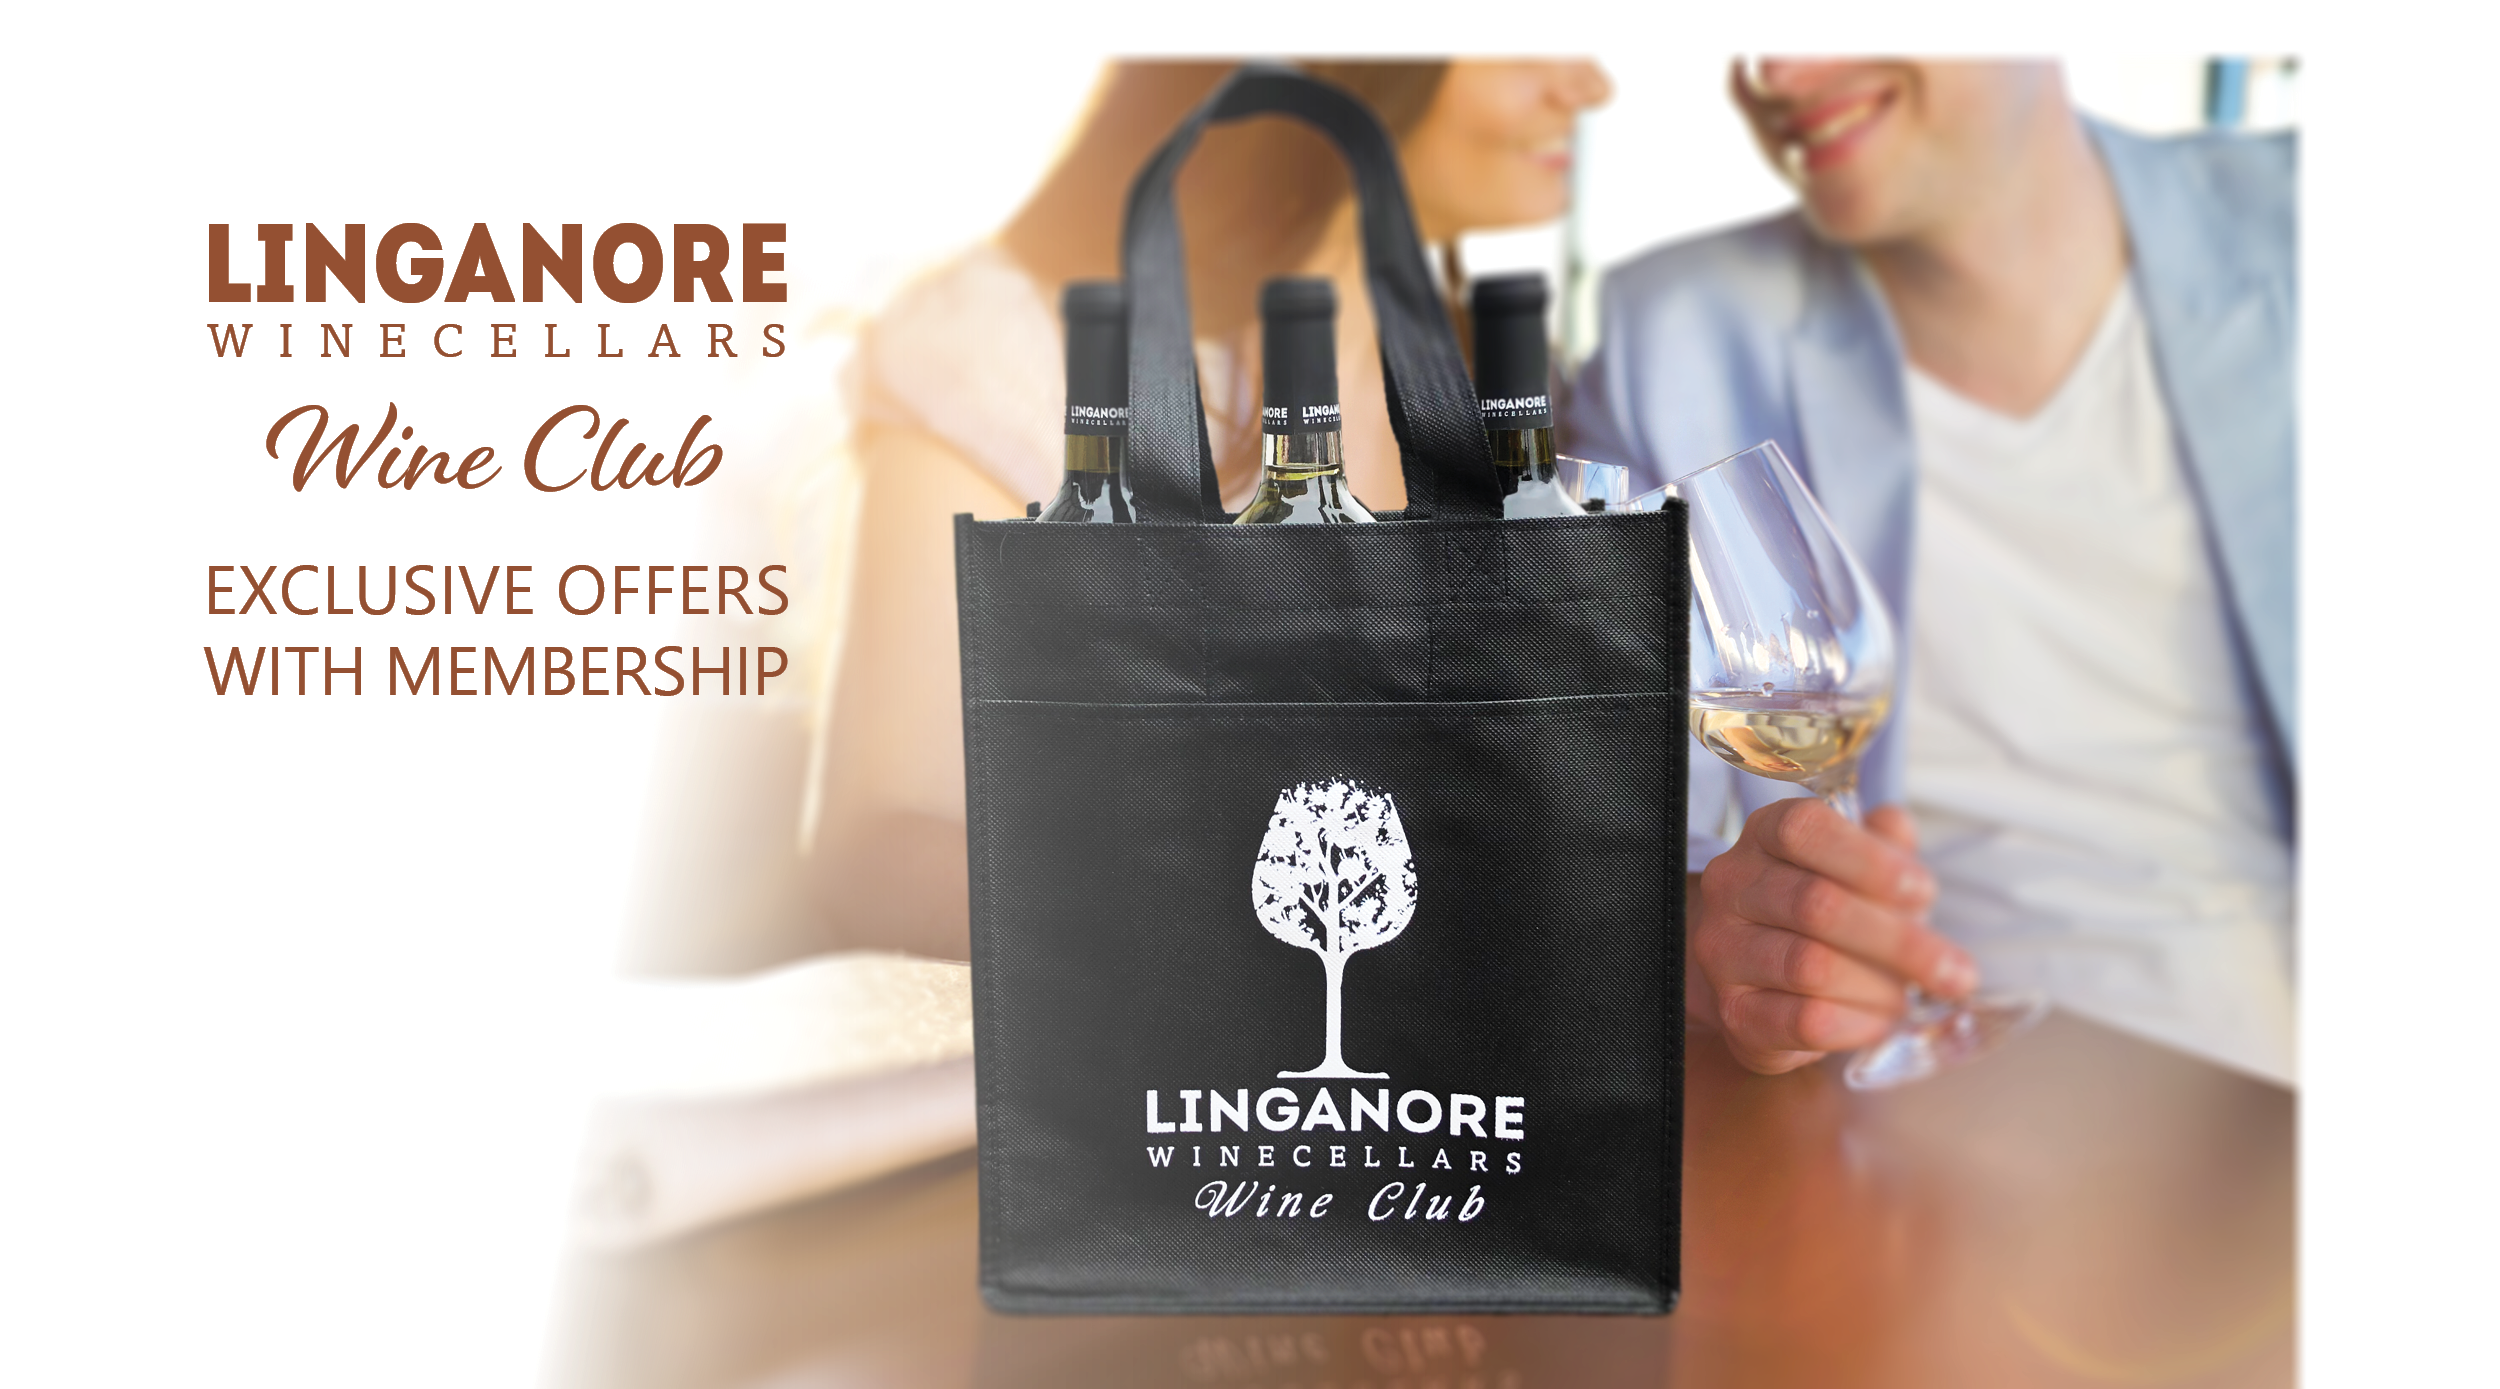 Join Our Wine Club